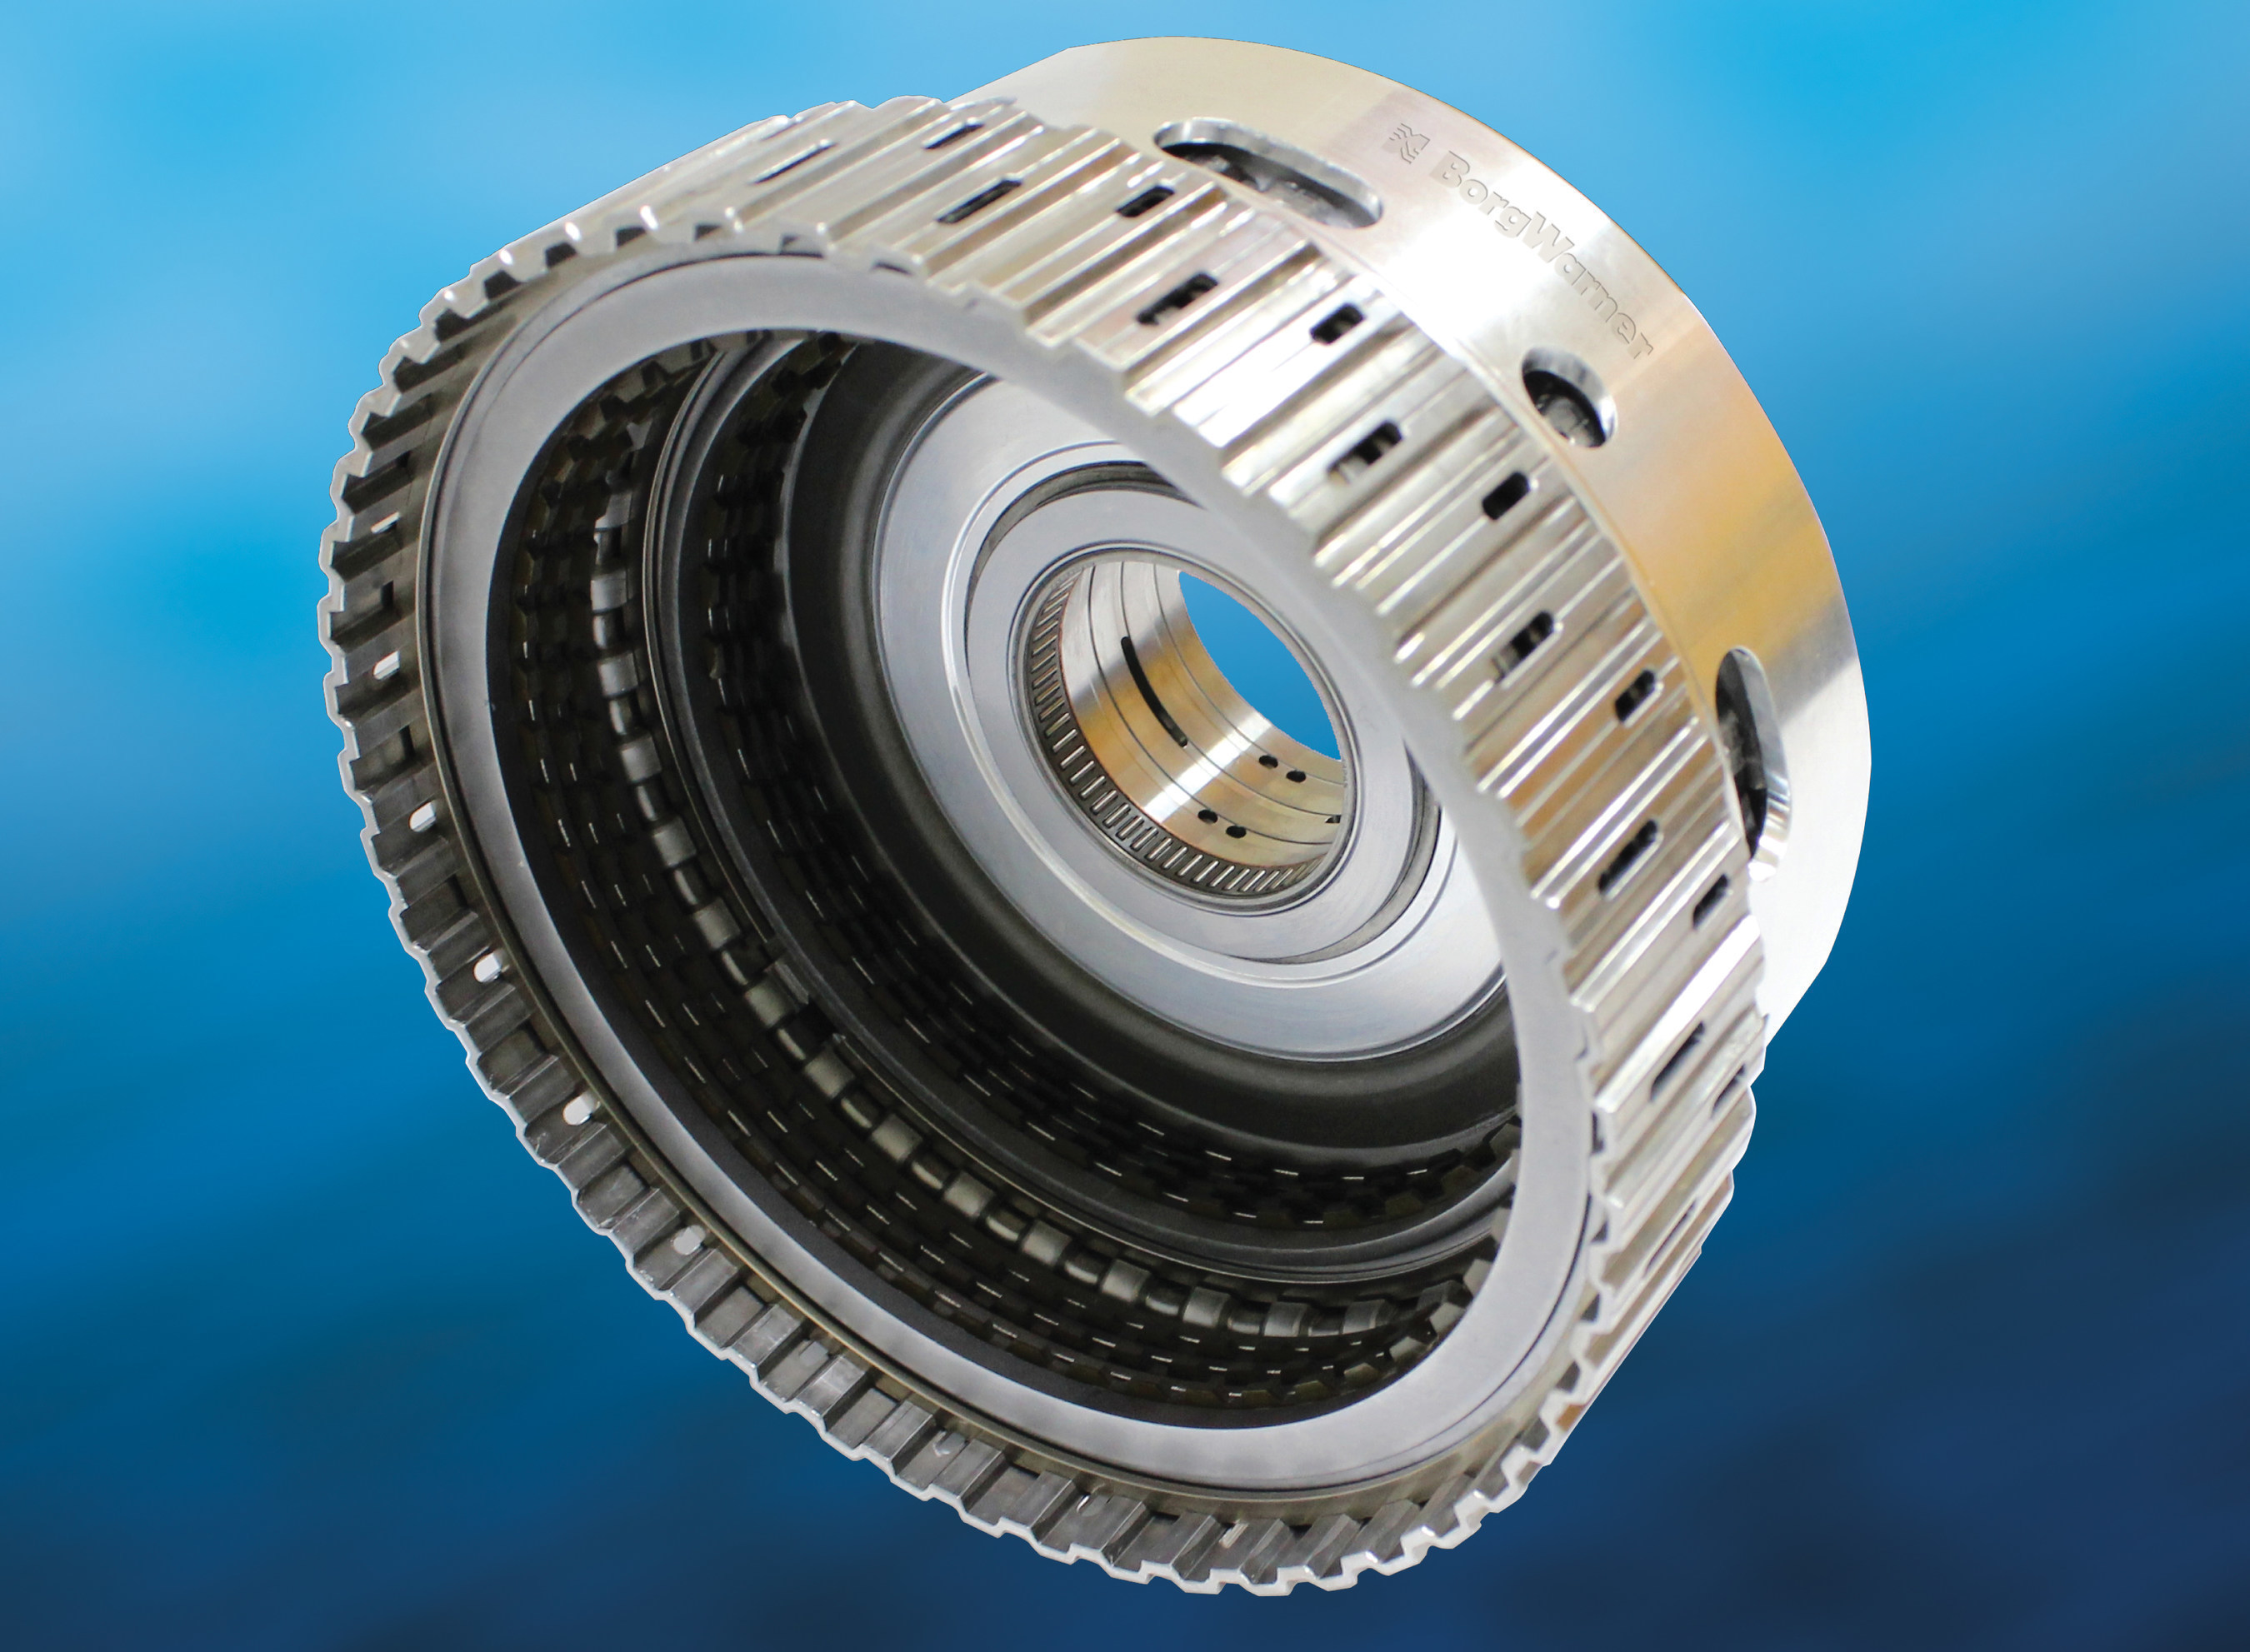 BorgWarner's new light-weight clutch module optimizes efficiency and reduces drag to help Hyundai's 8-speed automatic front-wheel drive transmission improve shift feel and fuel economy.